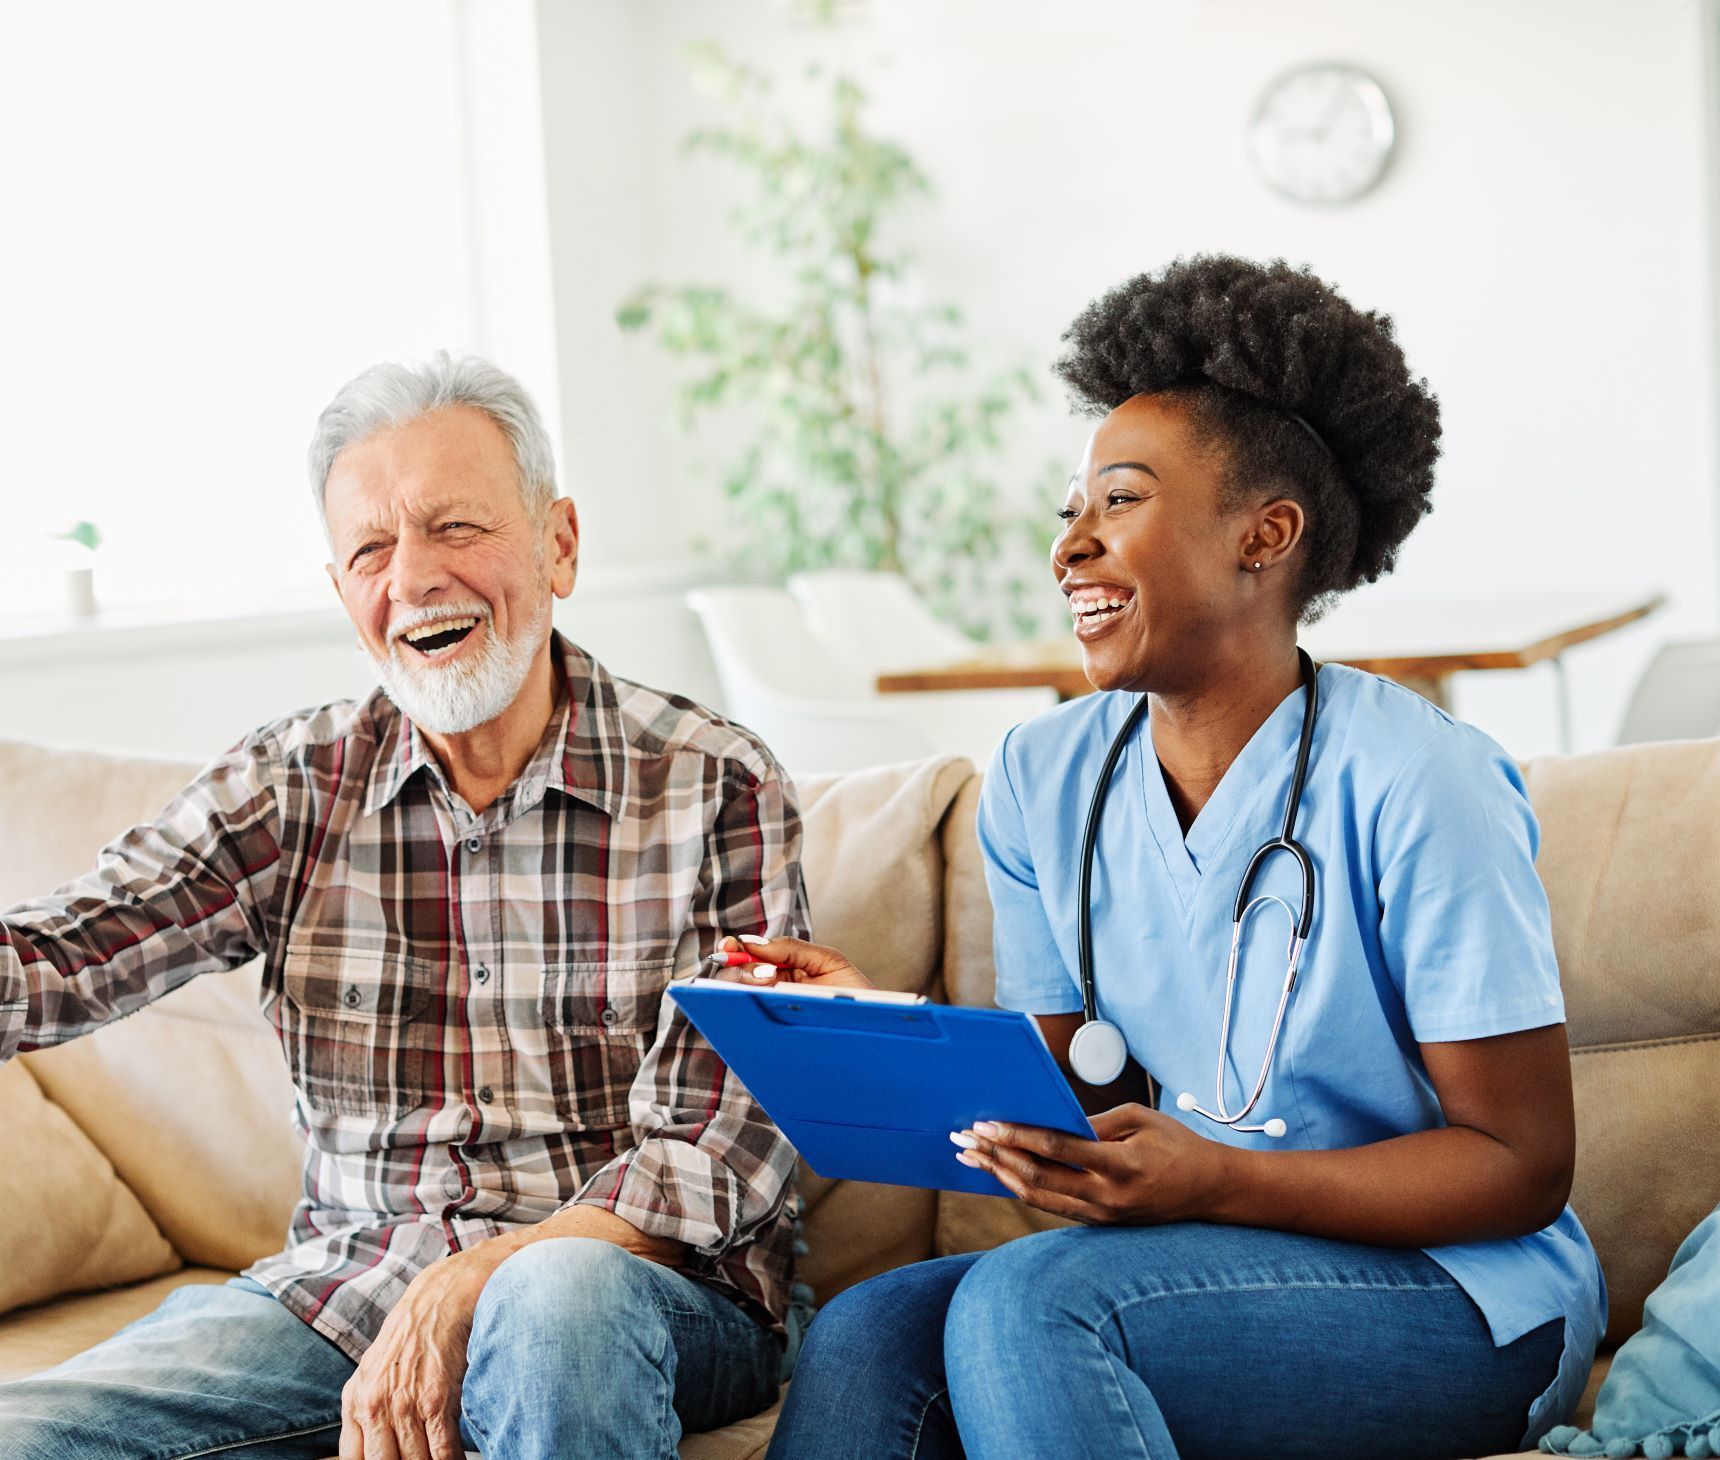 caregiver sitting on couch laughing with senior patient